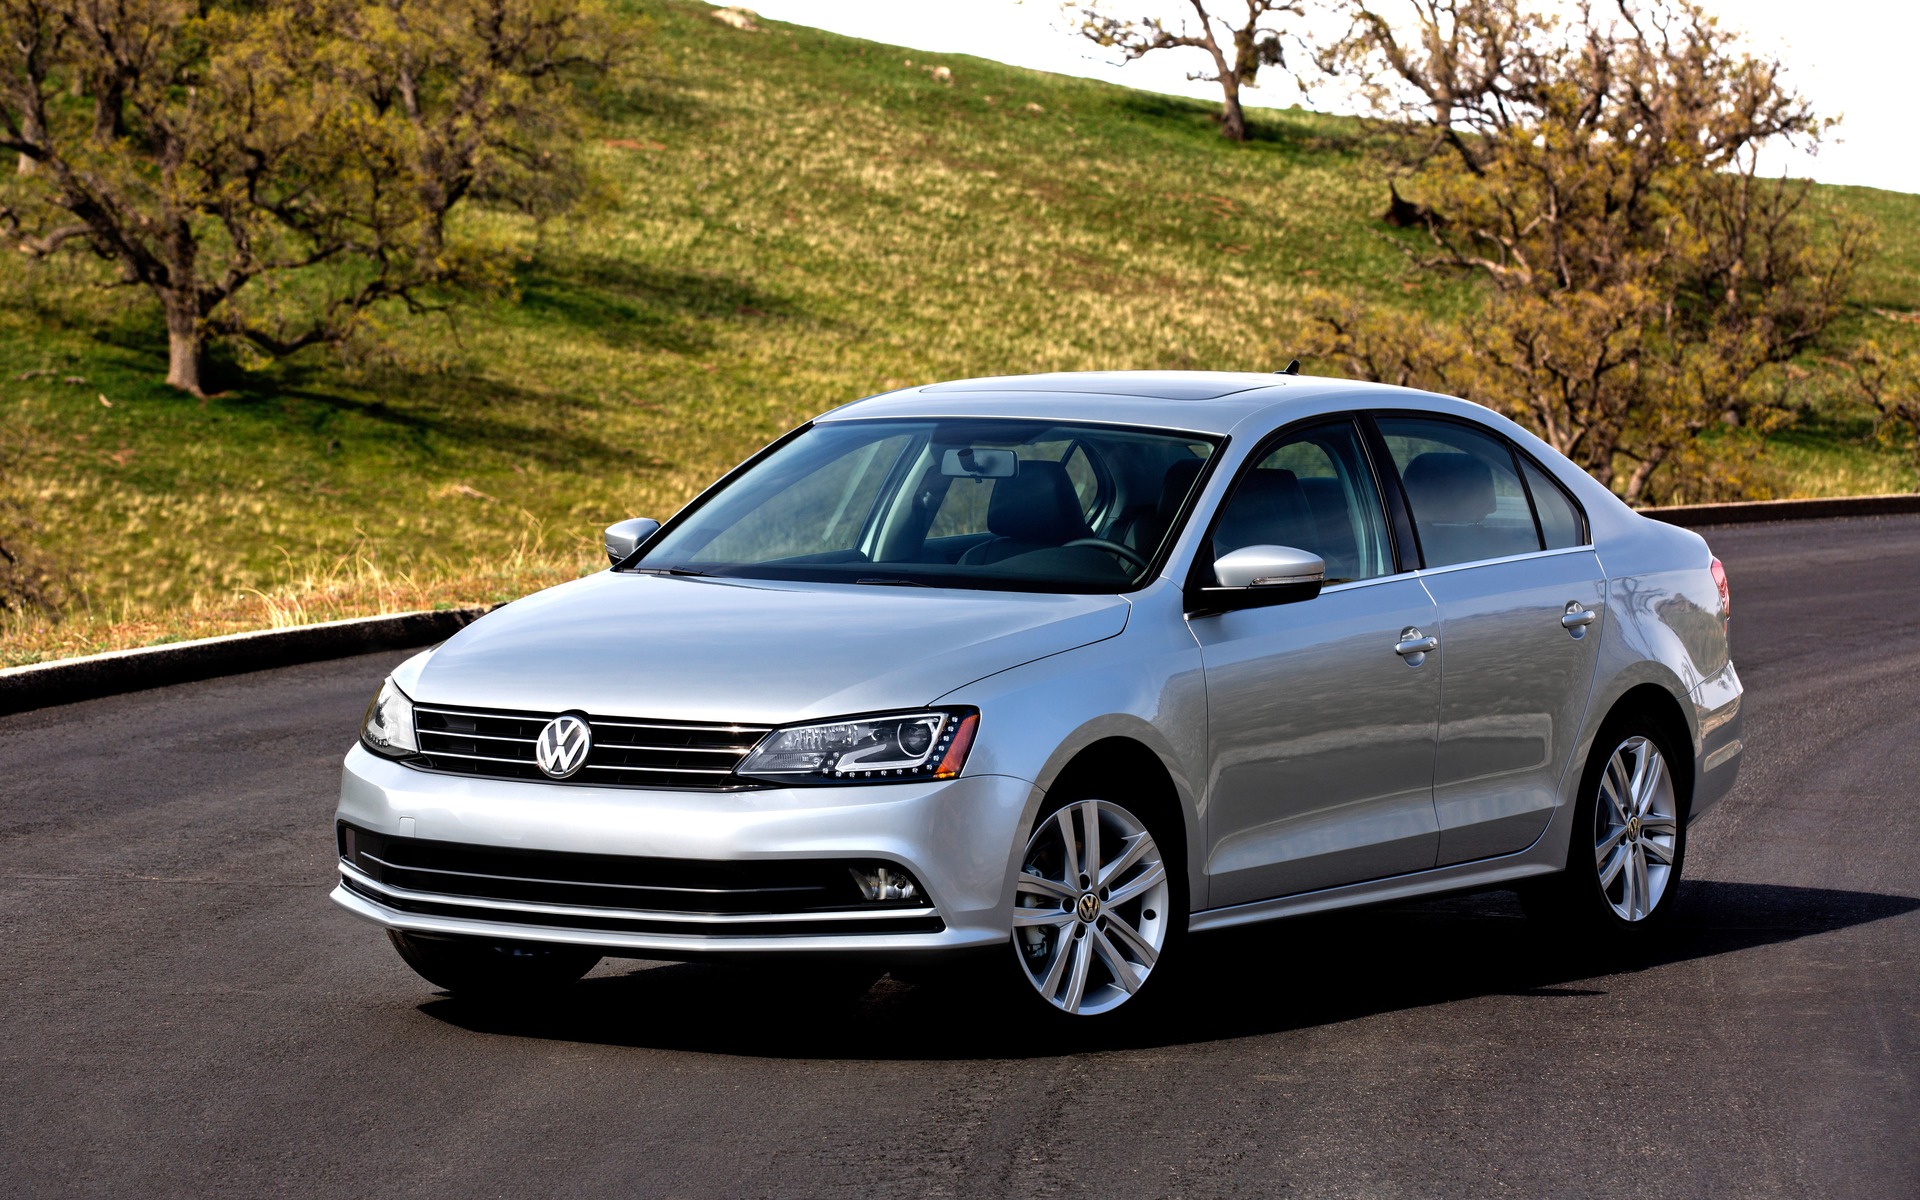 2015 Volkswagen Jetta: More Than a Simple Restyling - The Car Guide